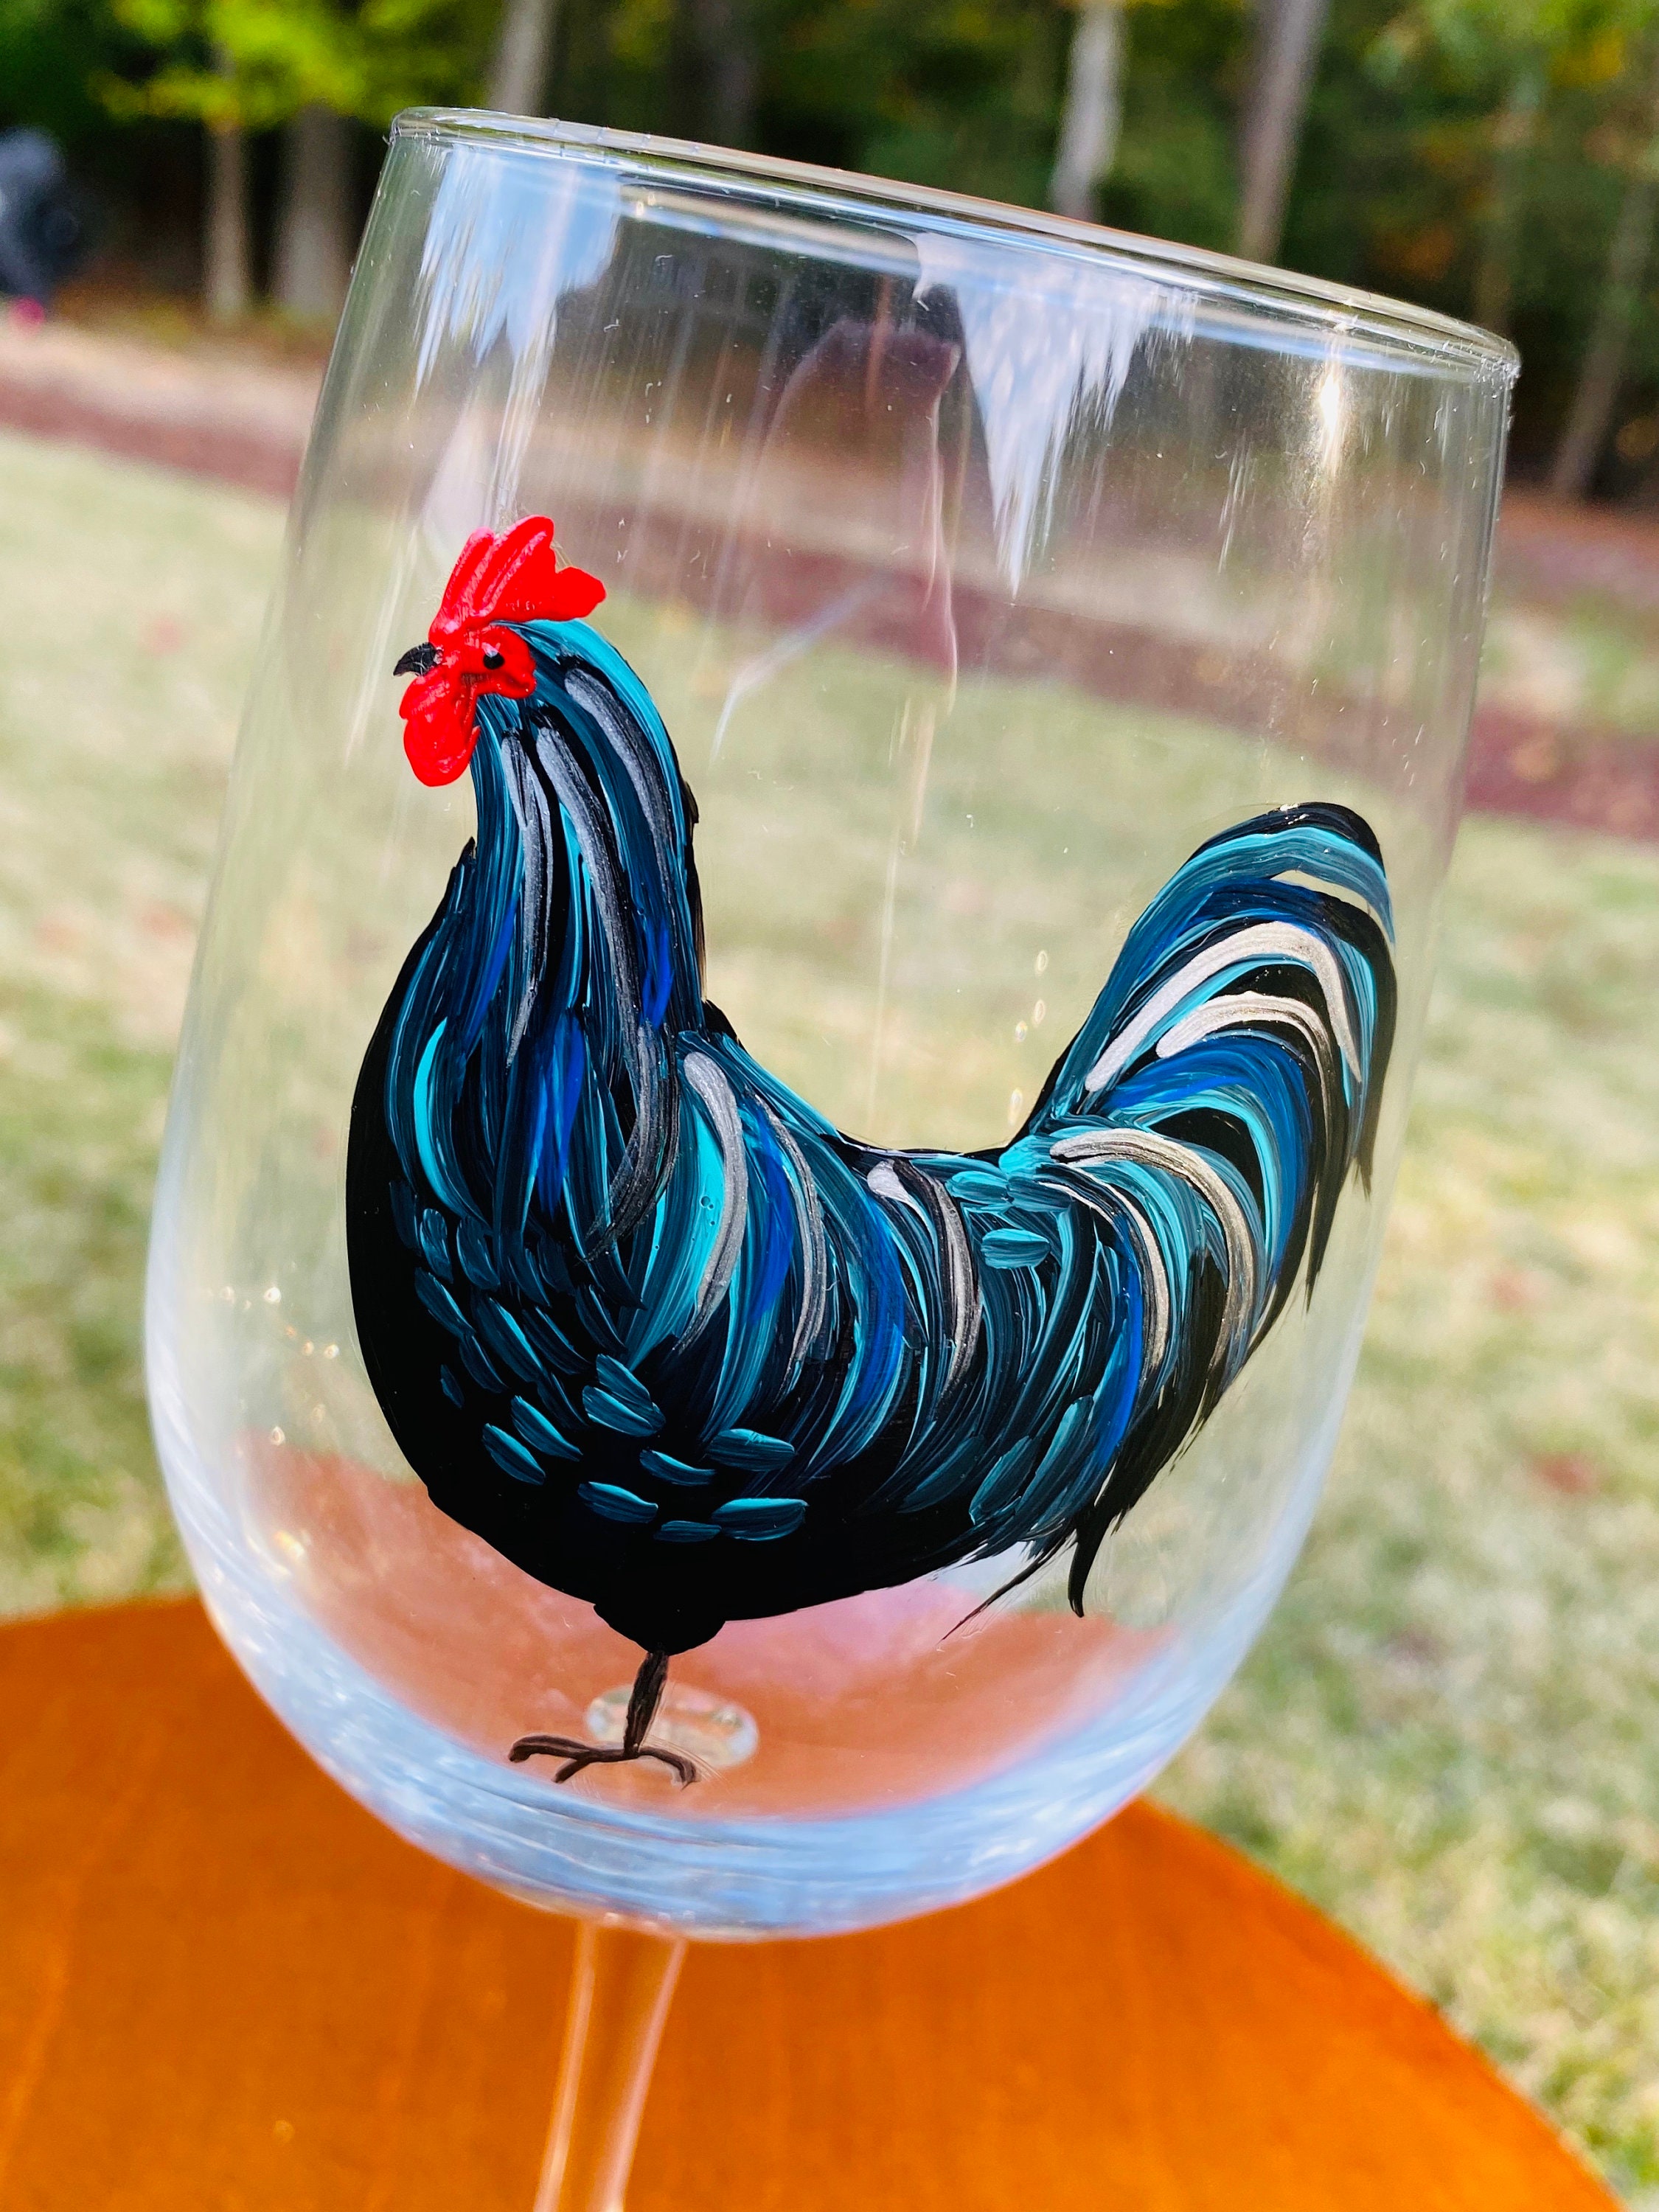 Painted Wine Glasses Rustic, Hand Painted Wine Glass, Black Rooster,  Rooster Decor, Farmhouse Decor, Country Kitchen, Hand Painted Gift 